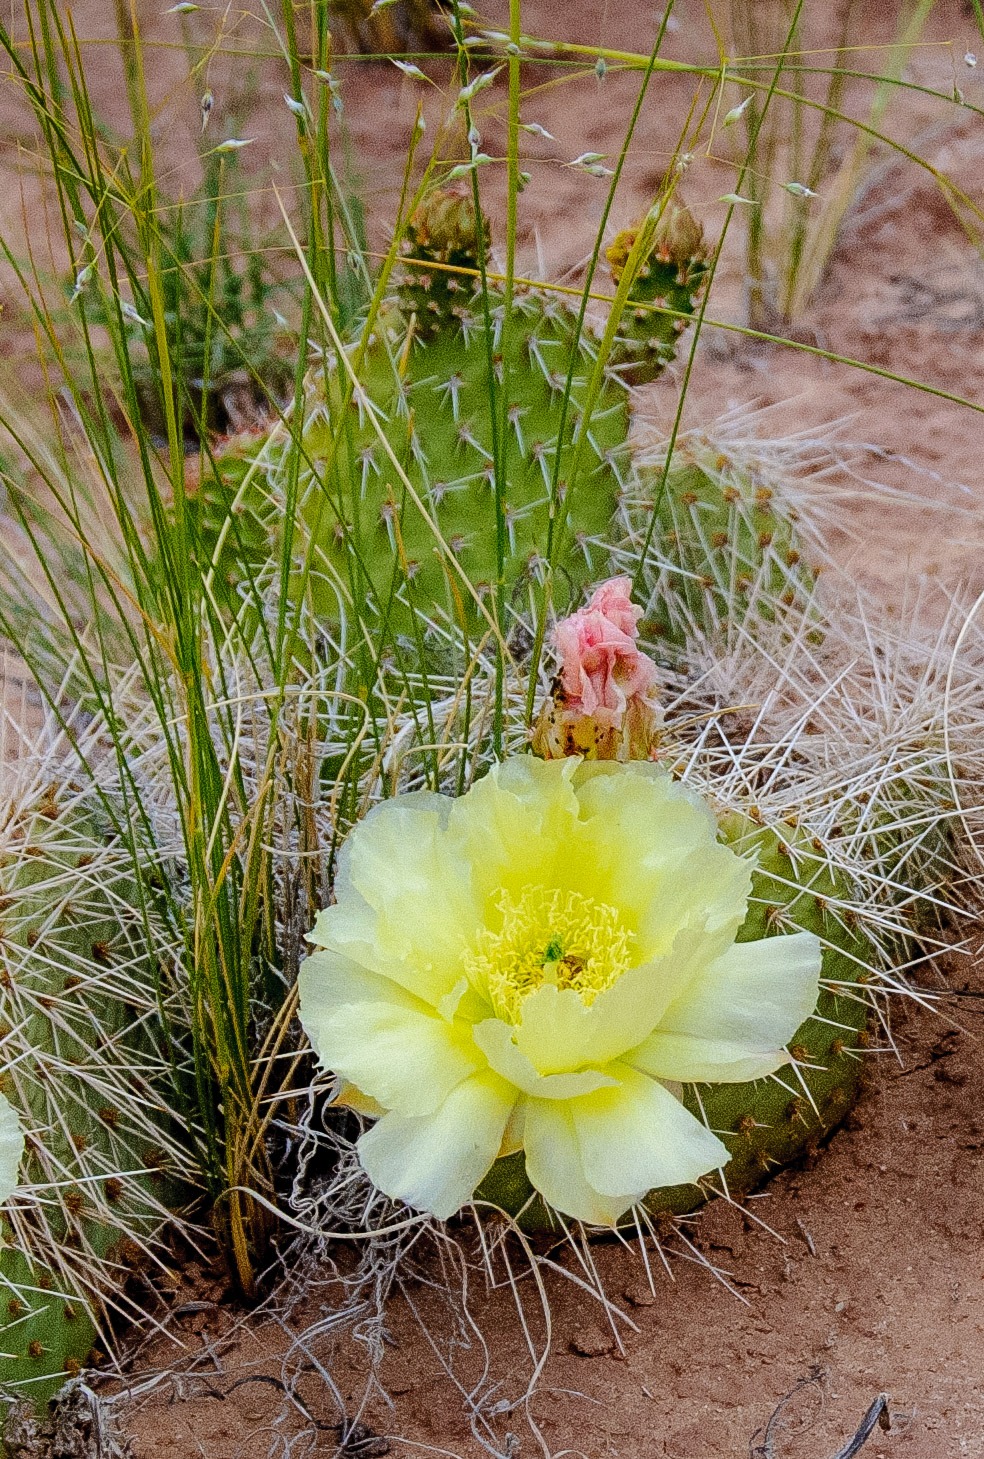 This pale yellow blossom adorns this prickly pear cactus along Cathedral Road in Capitol Reef National Park, Utah.